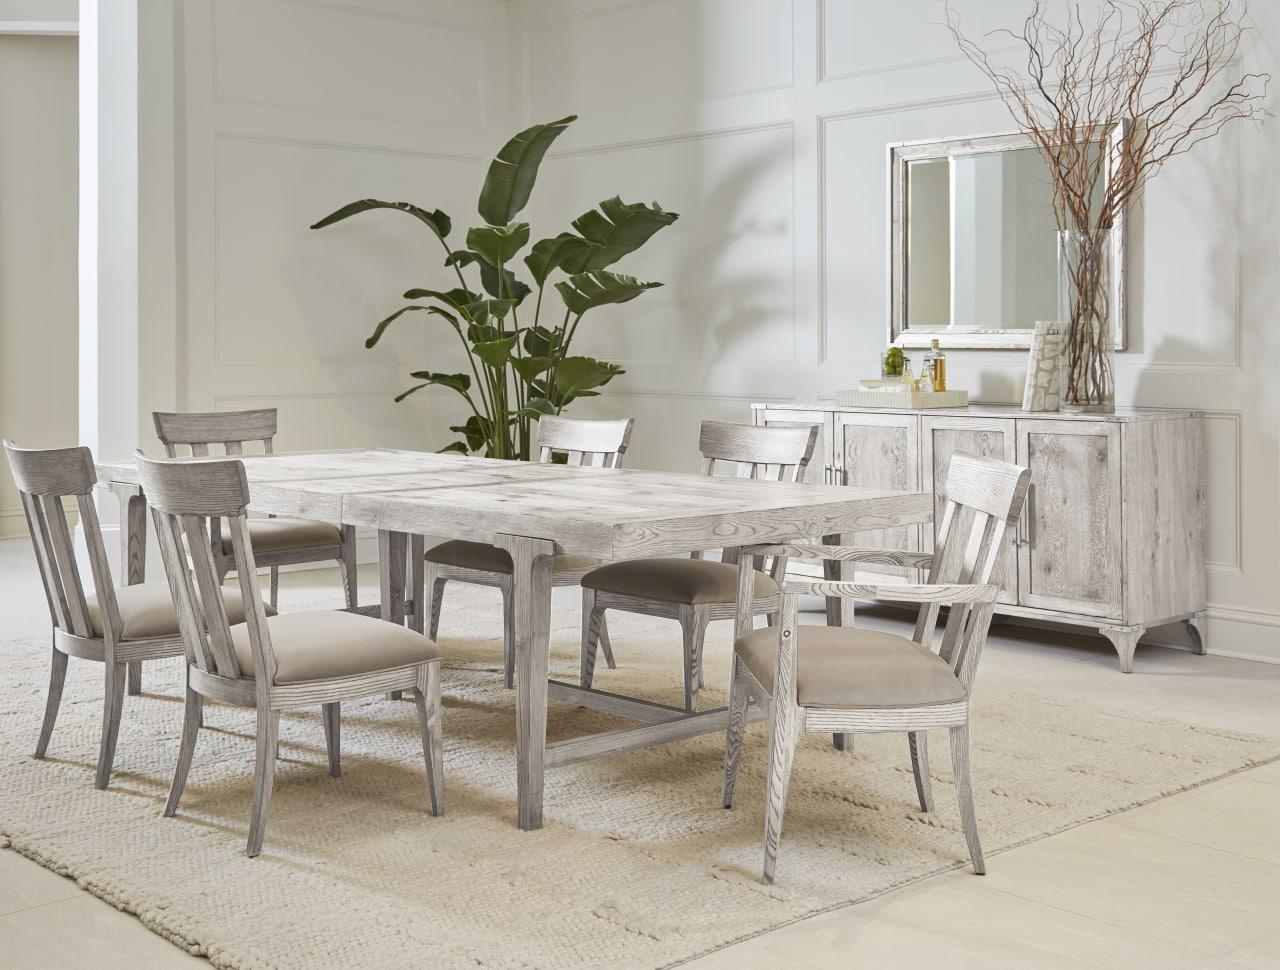 Traditional, Farmhouse Dining Table Set Sojourn 316220-2311-7pcs in Beige 